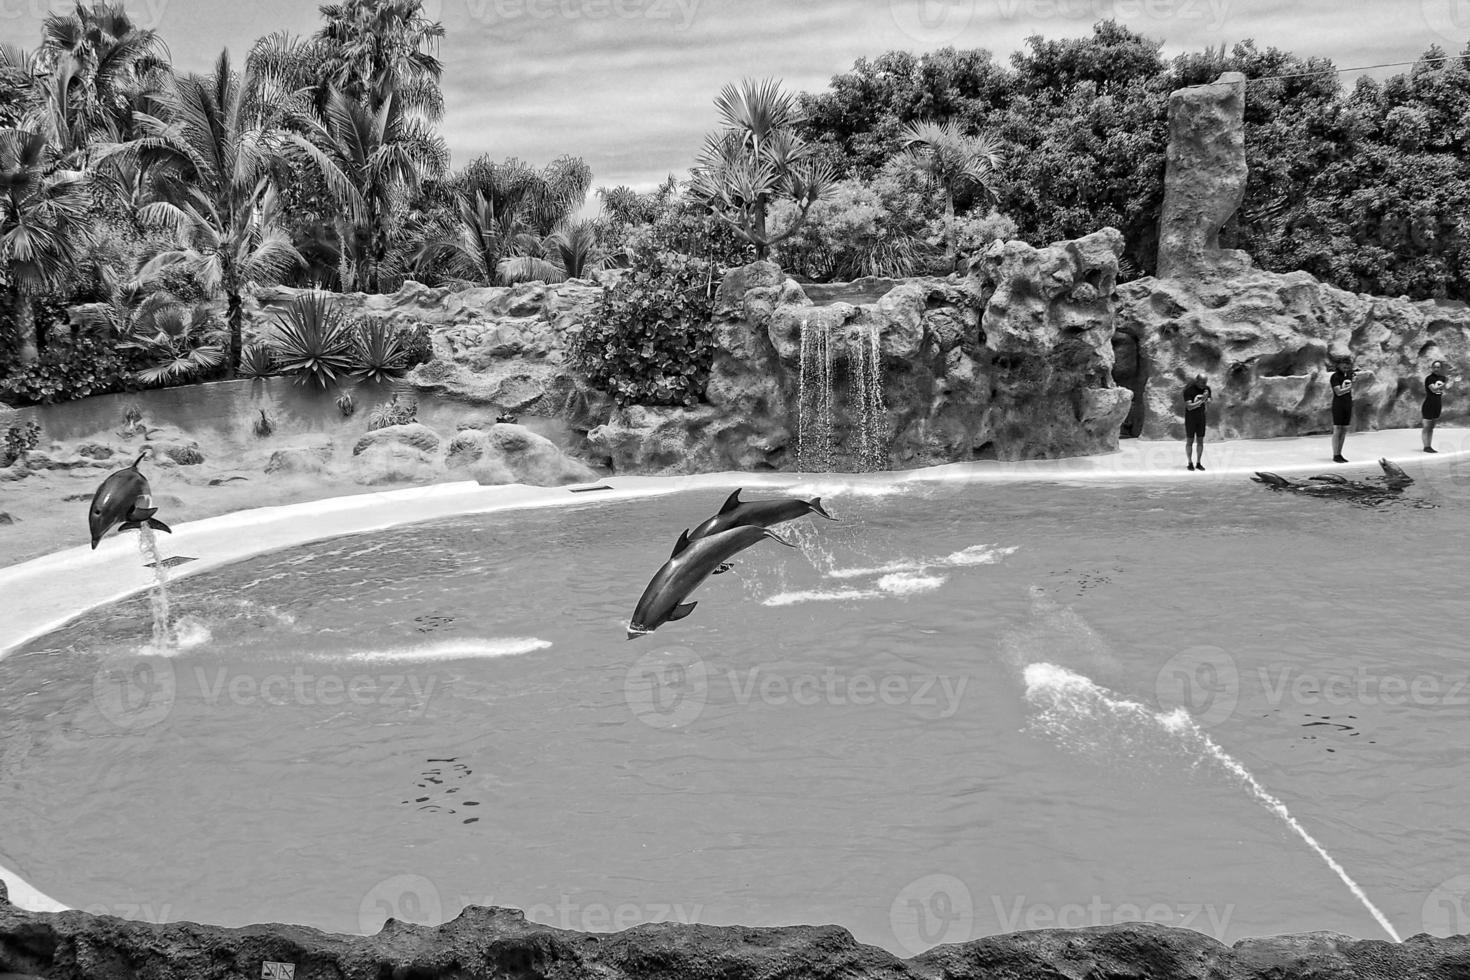 show of training a large adult dolphin mammal in a zoo park on a sunny day photo